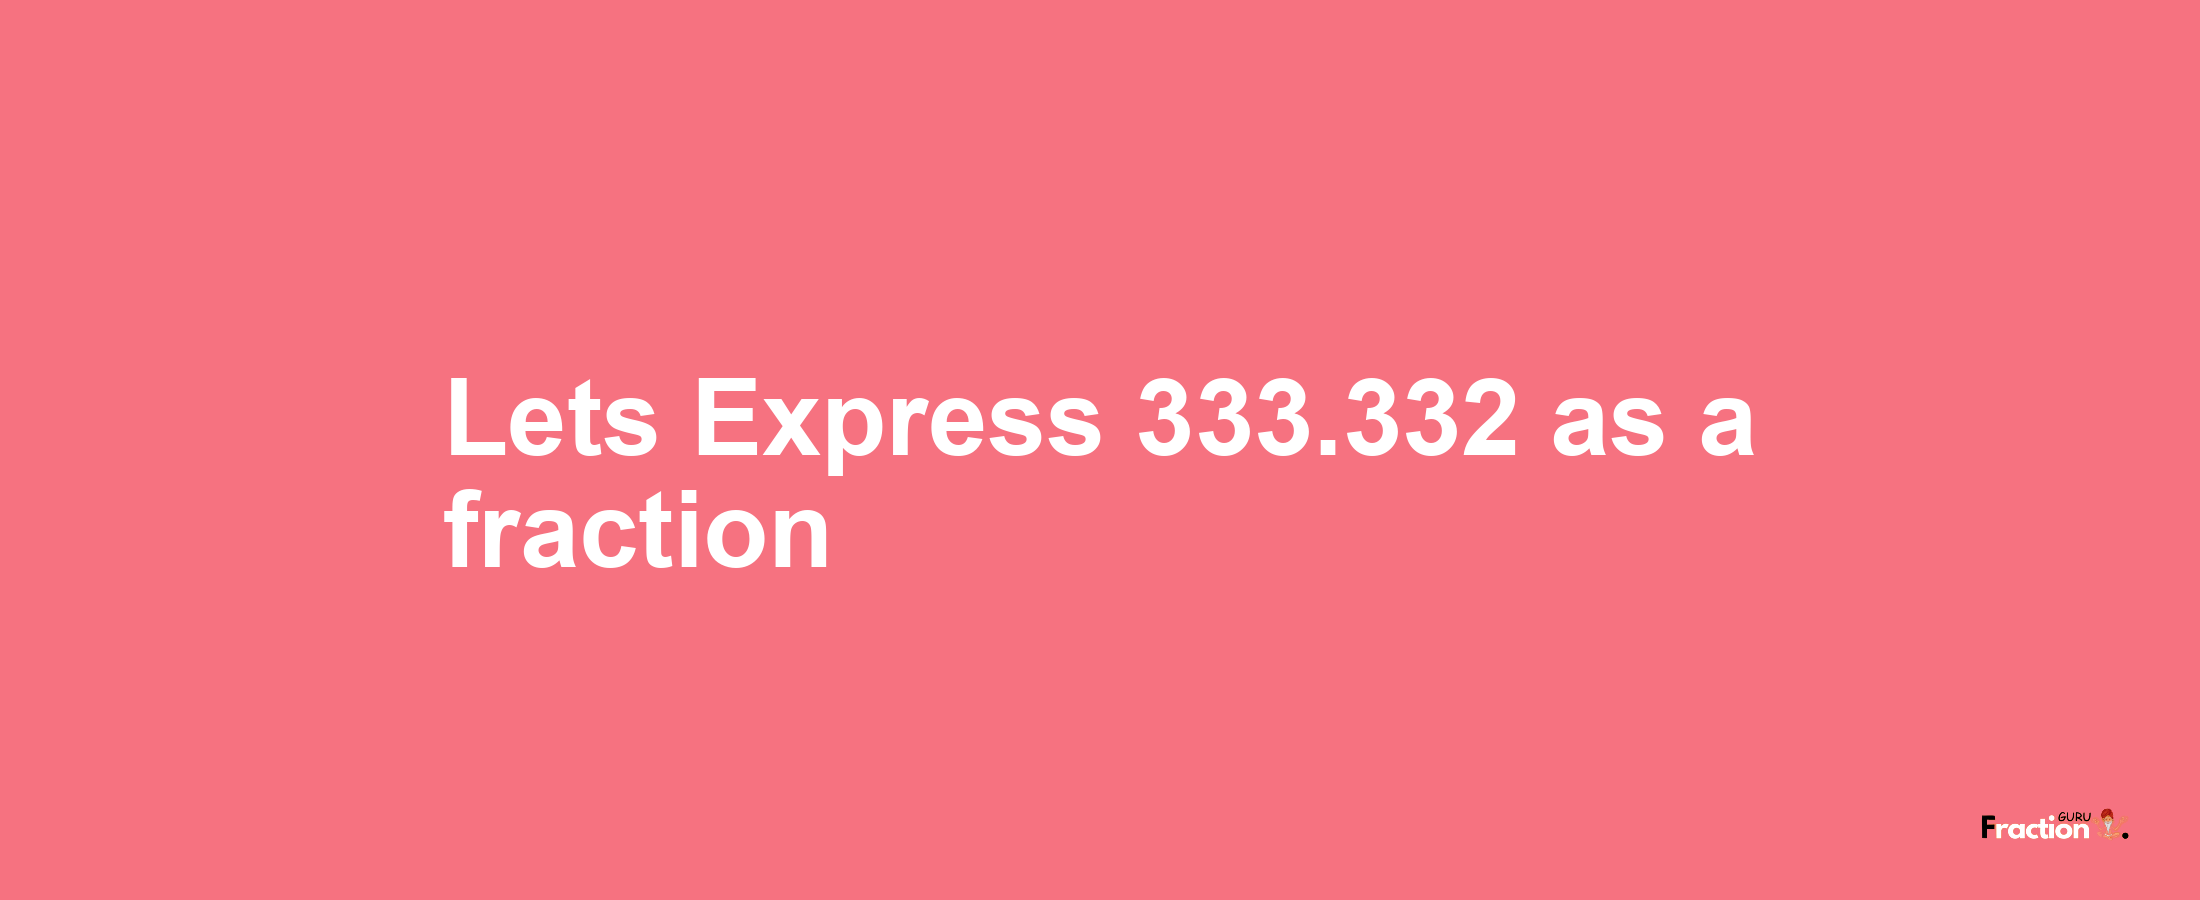 Lets Express 333.332 as afraction